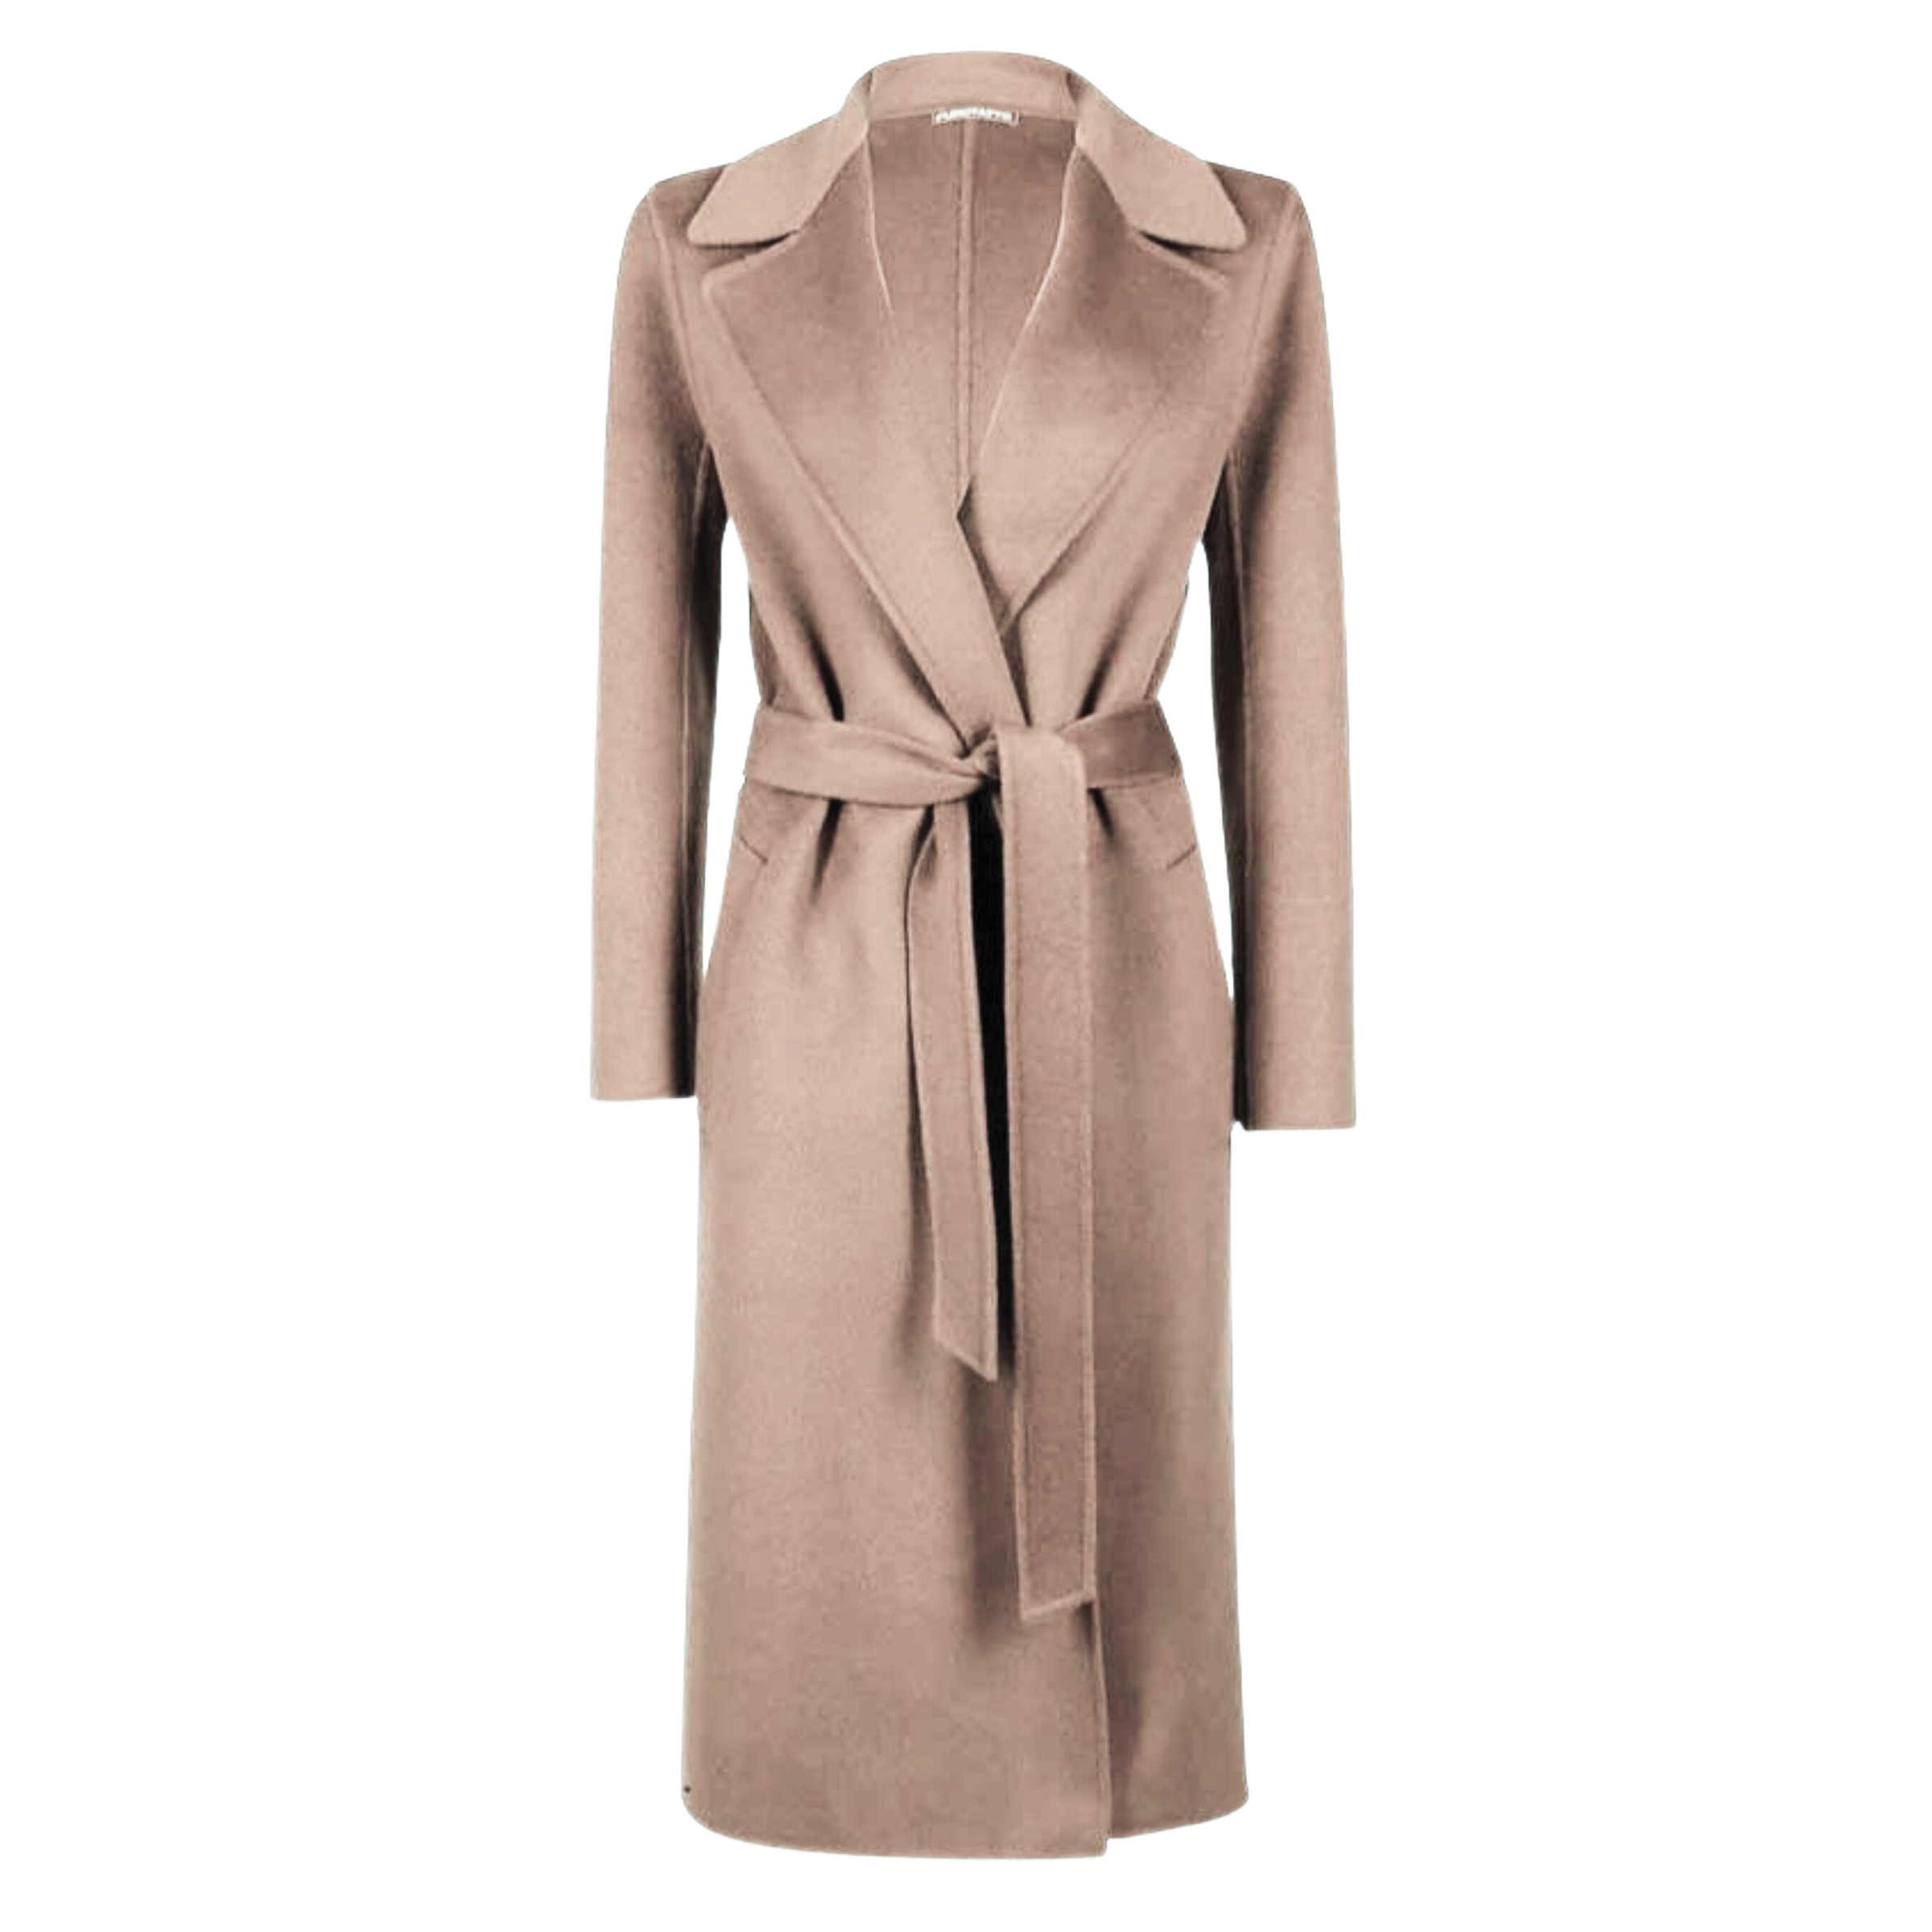 Purotatto Cashmere and Wool Belted Coat Timeless Martha\'s Vineyard